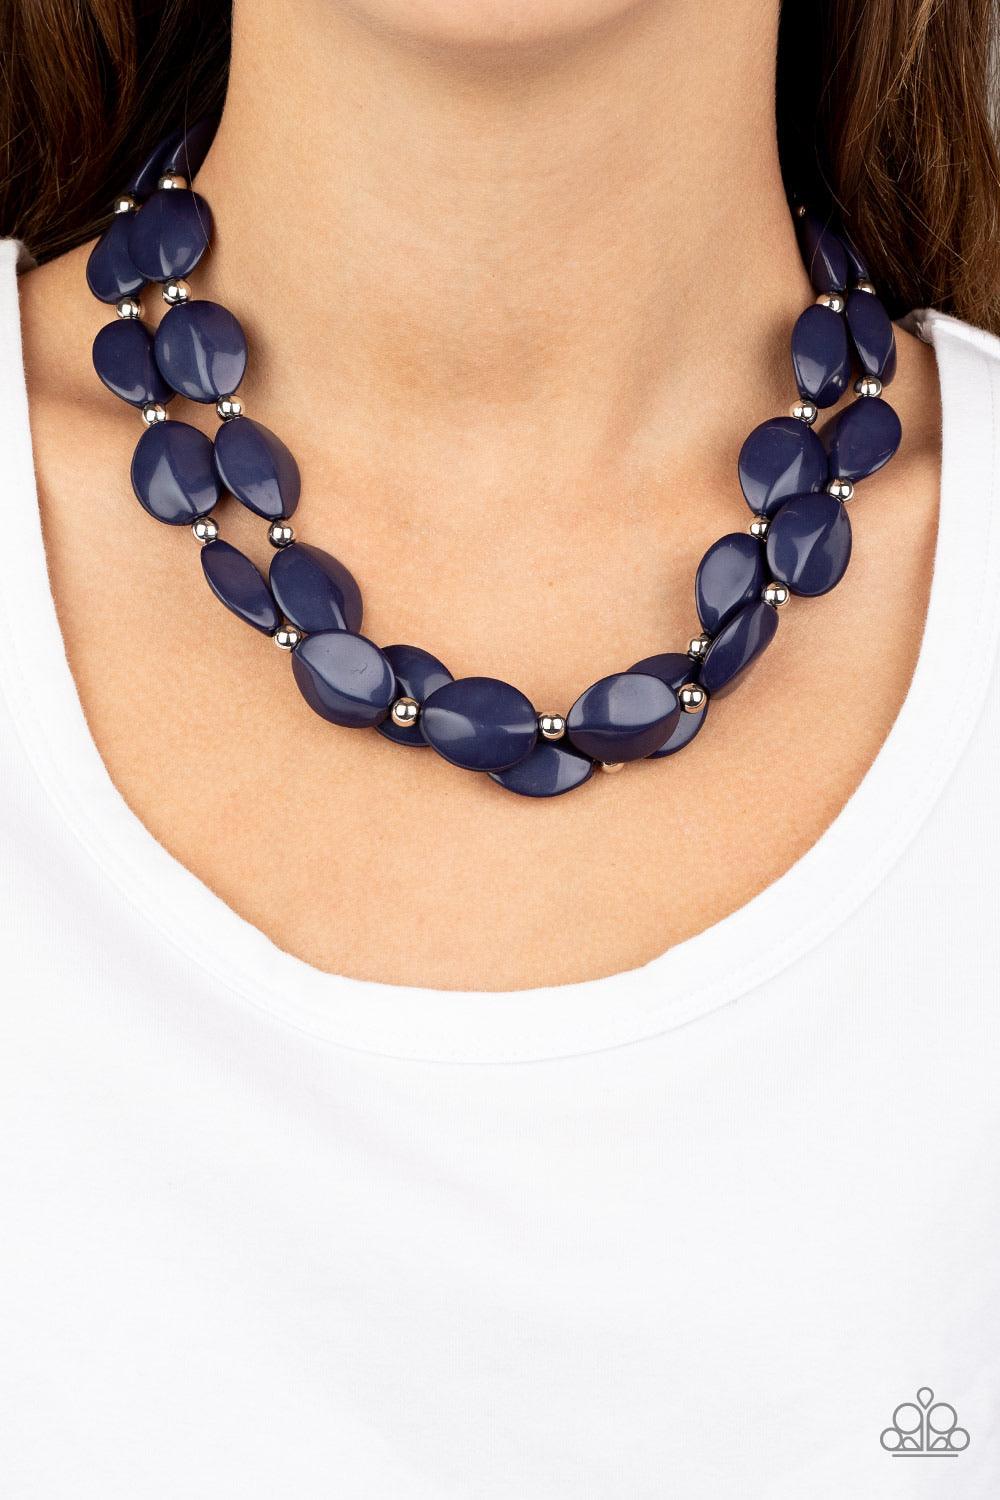 Paparazzi Accessories Two-Story Stunner - Blue Two rows of dainty silver beads and faceted Blue Depths faux stone beads alternate along invisible wires below the collar, creating bold, colorful layers. Features an adjustable clasp closure. Sold as one ind